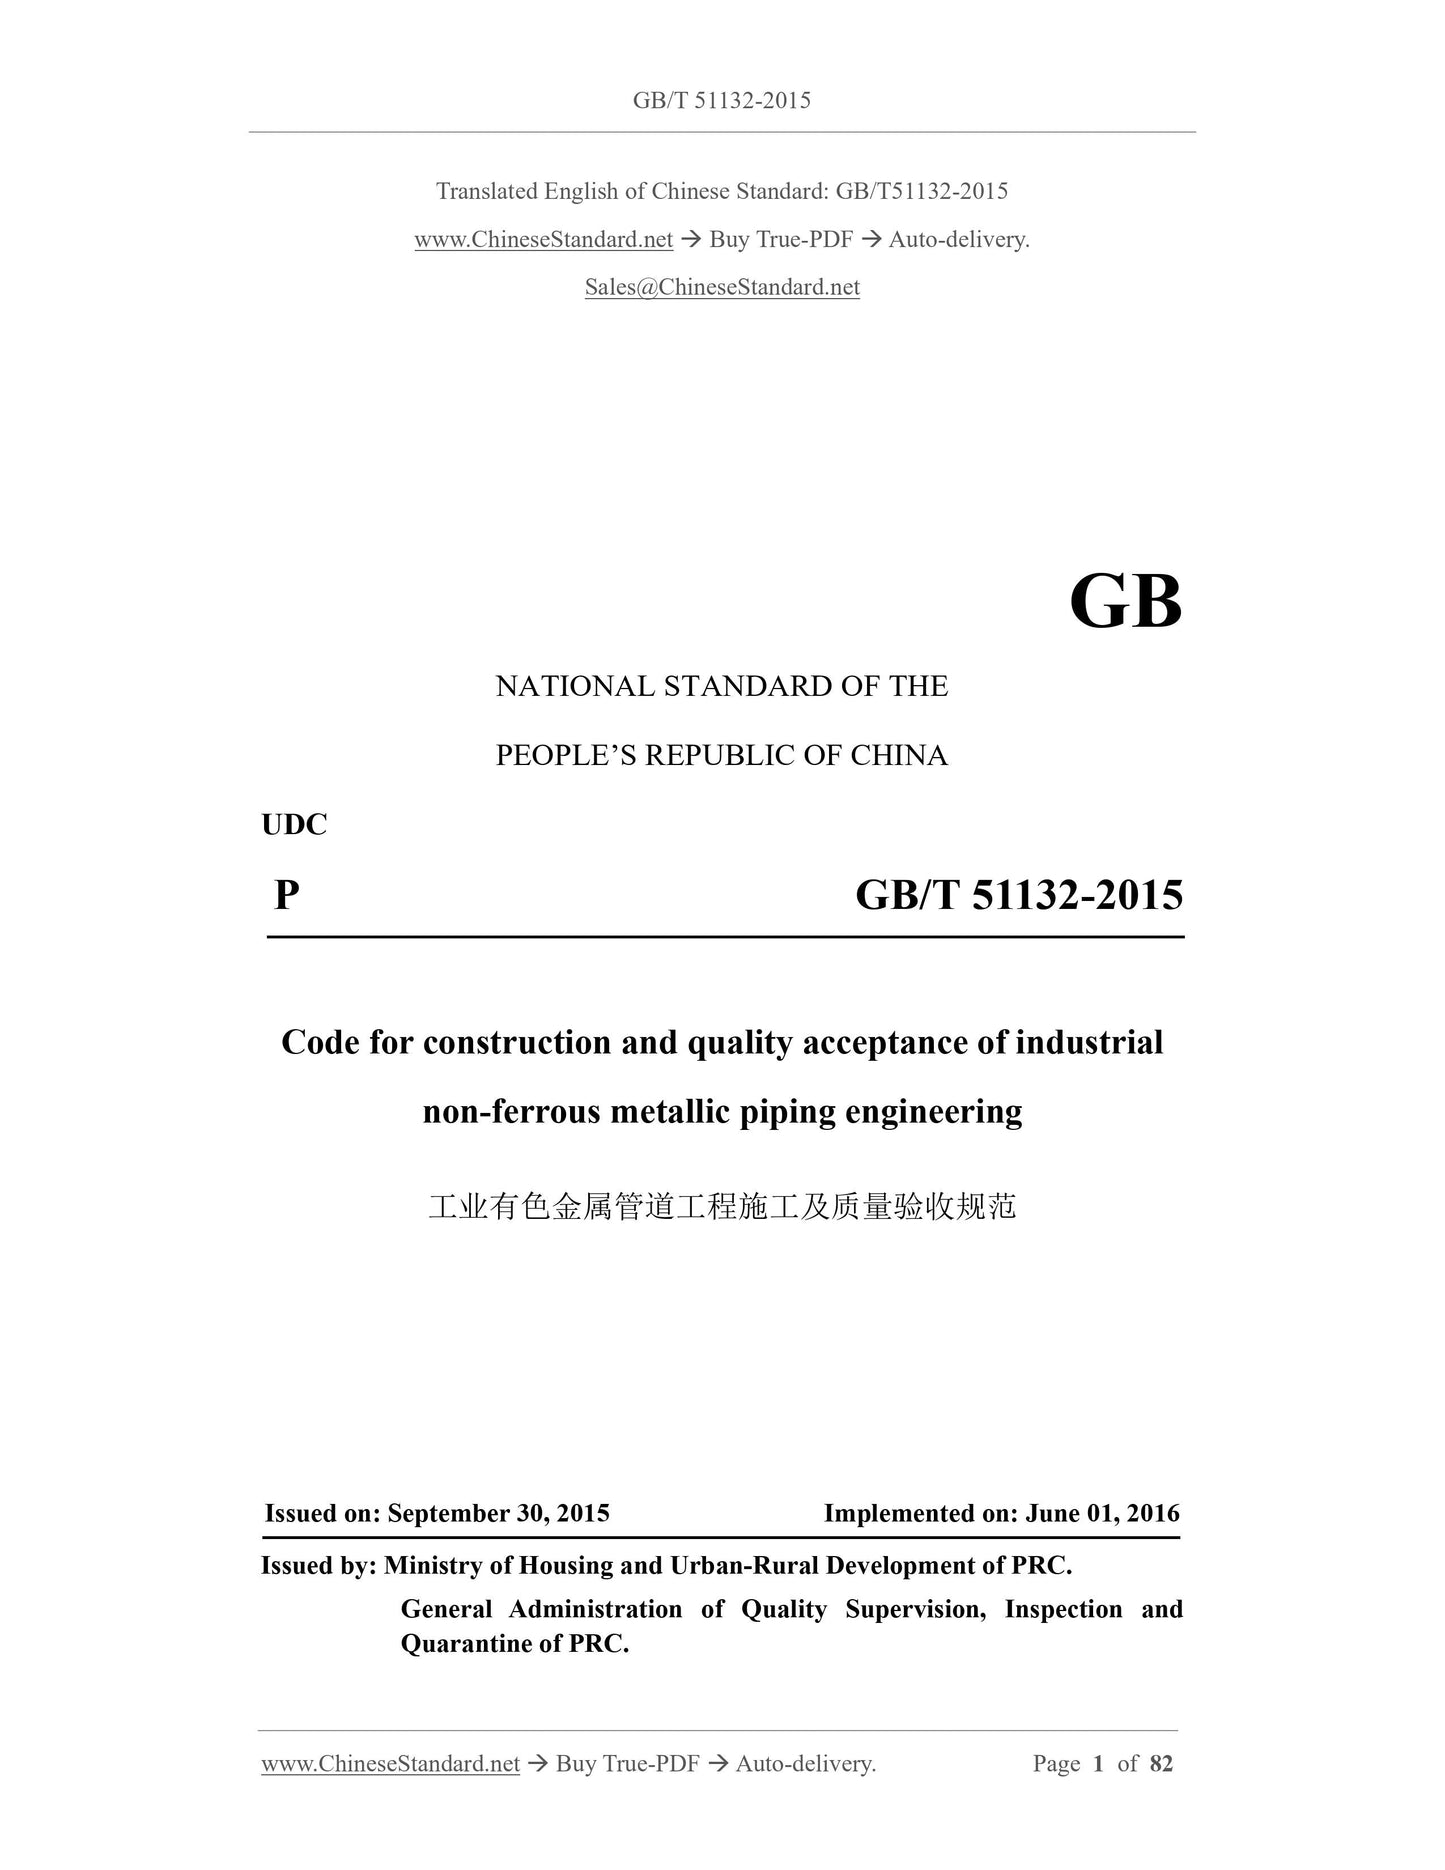 GB/T 51132-2015 Page 1